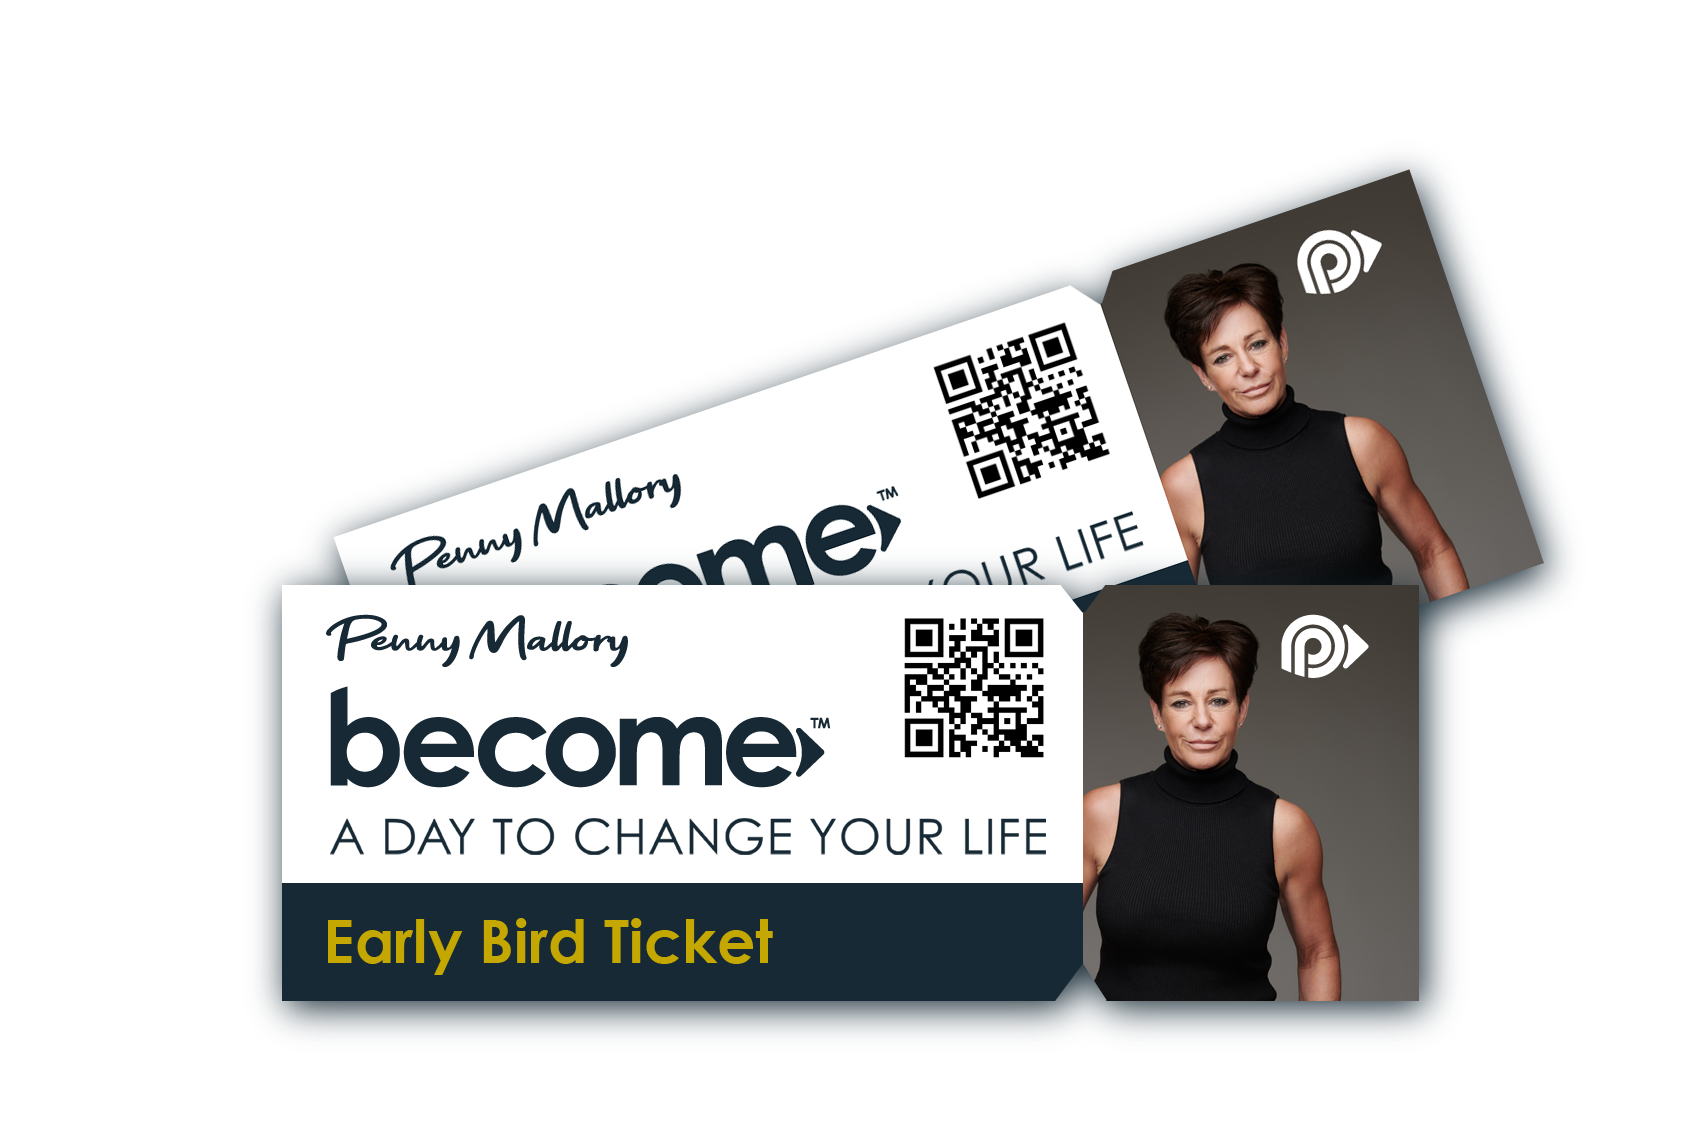 Early bird tickets for Become